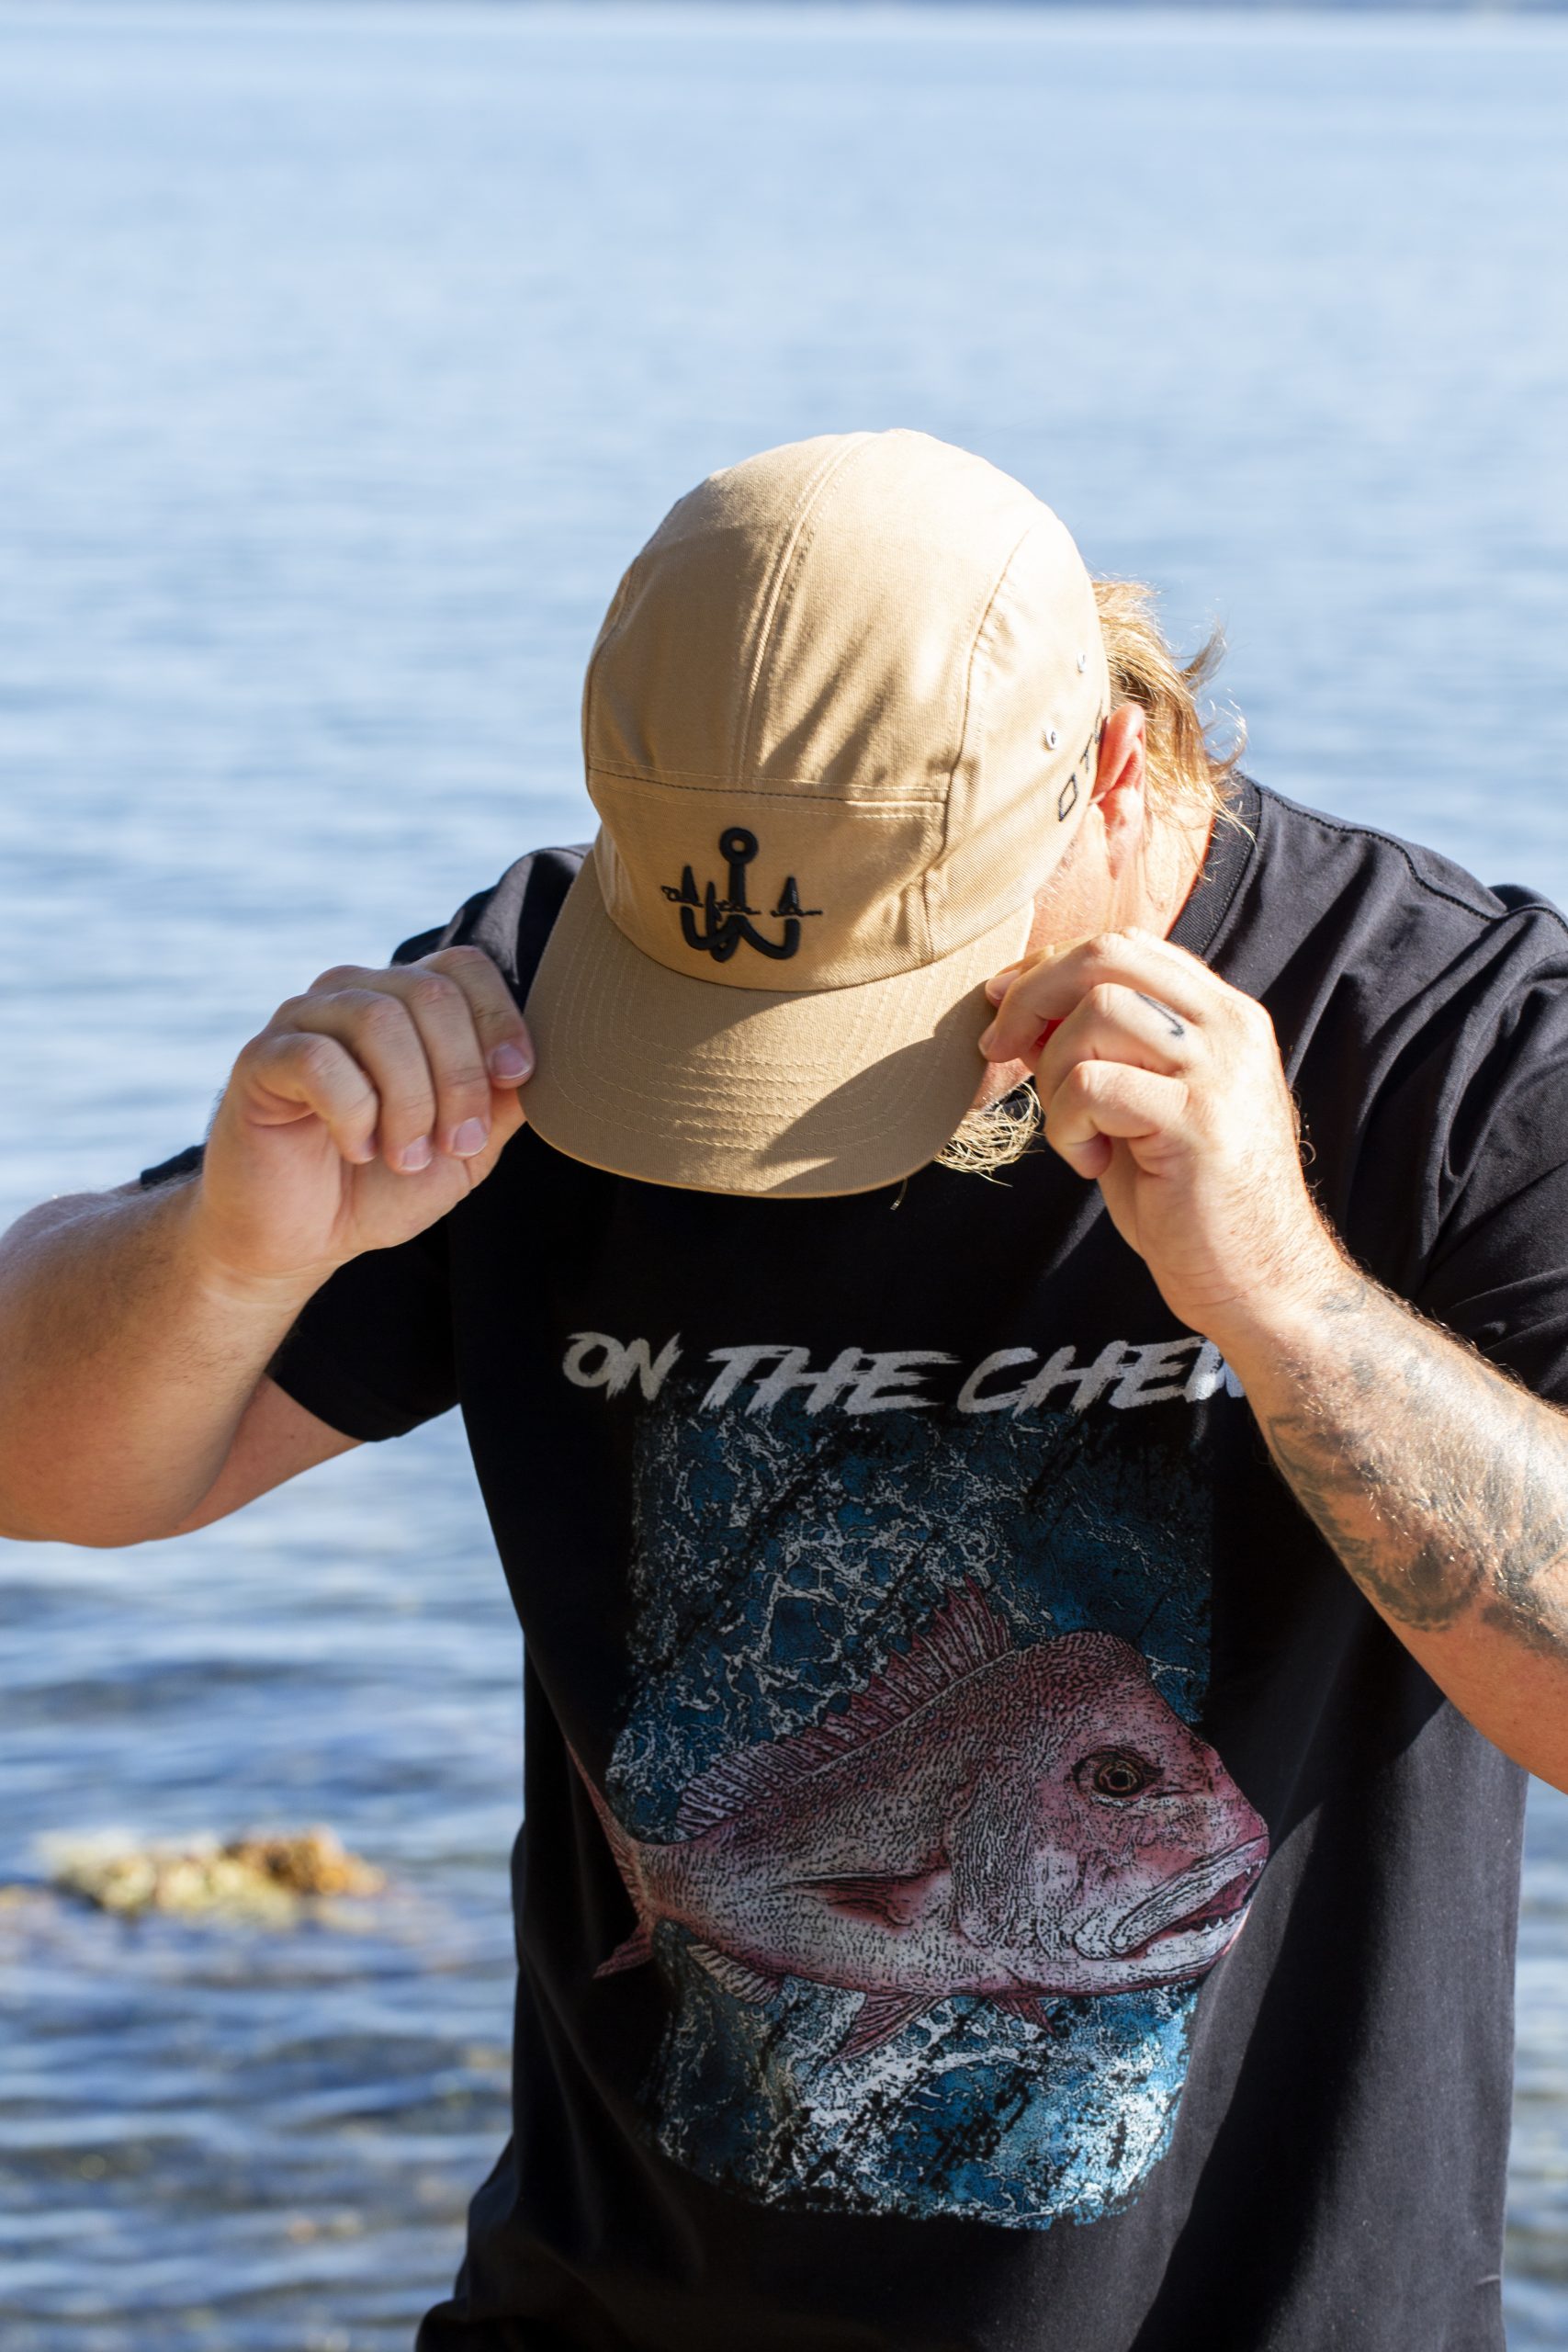 Men's Blue Scaled Fishing Shirts – Hooked Apparel